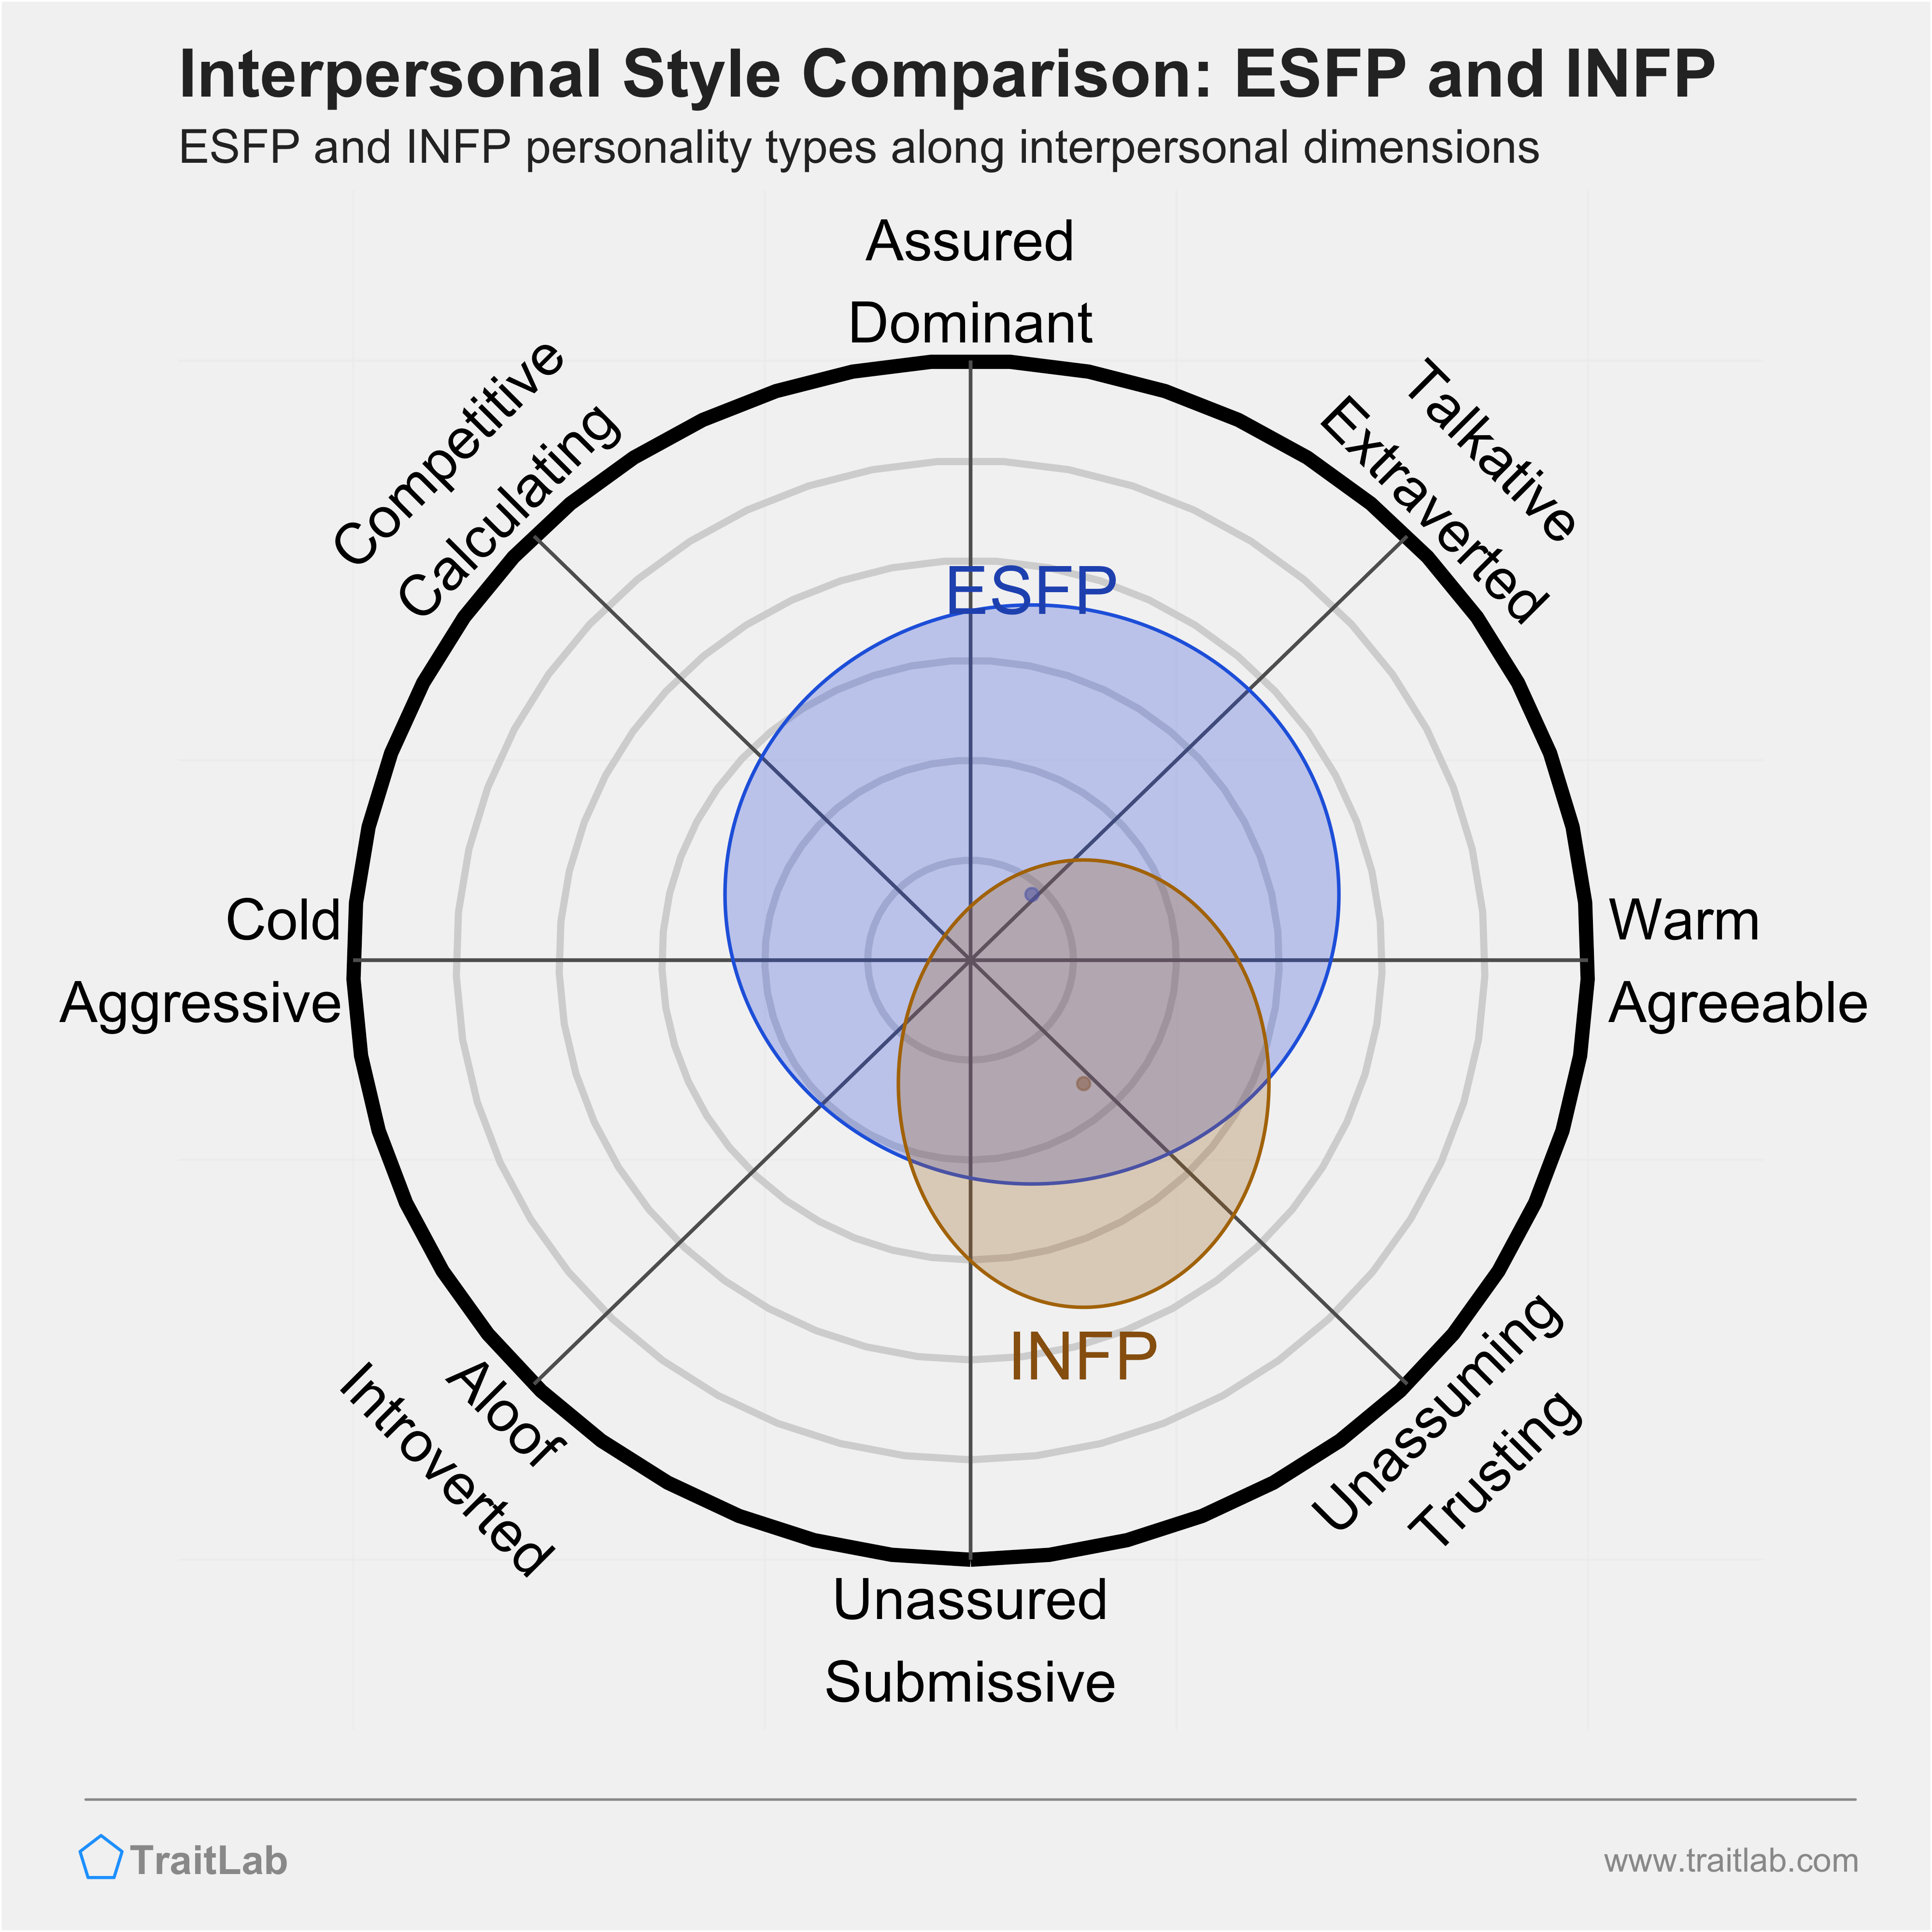 ESFP and INFP comparison across interpersonal dimensions